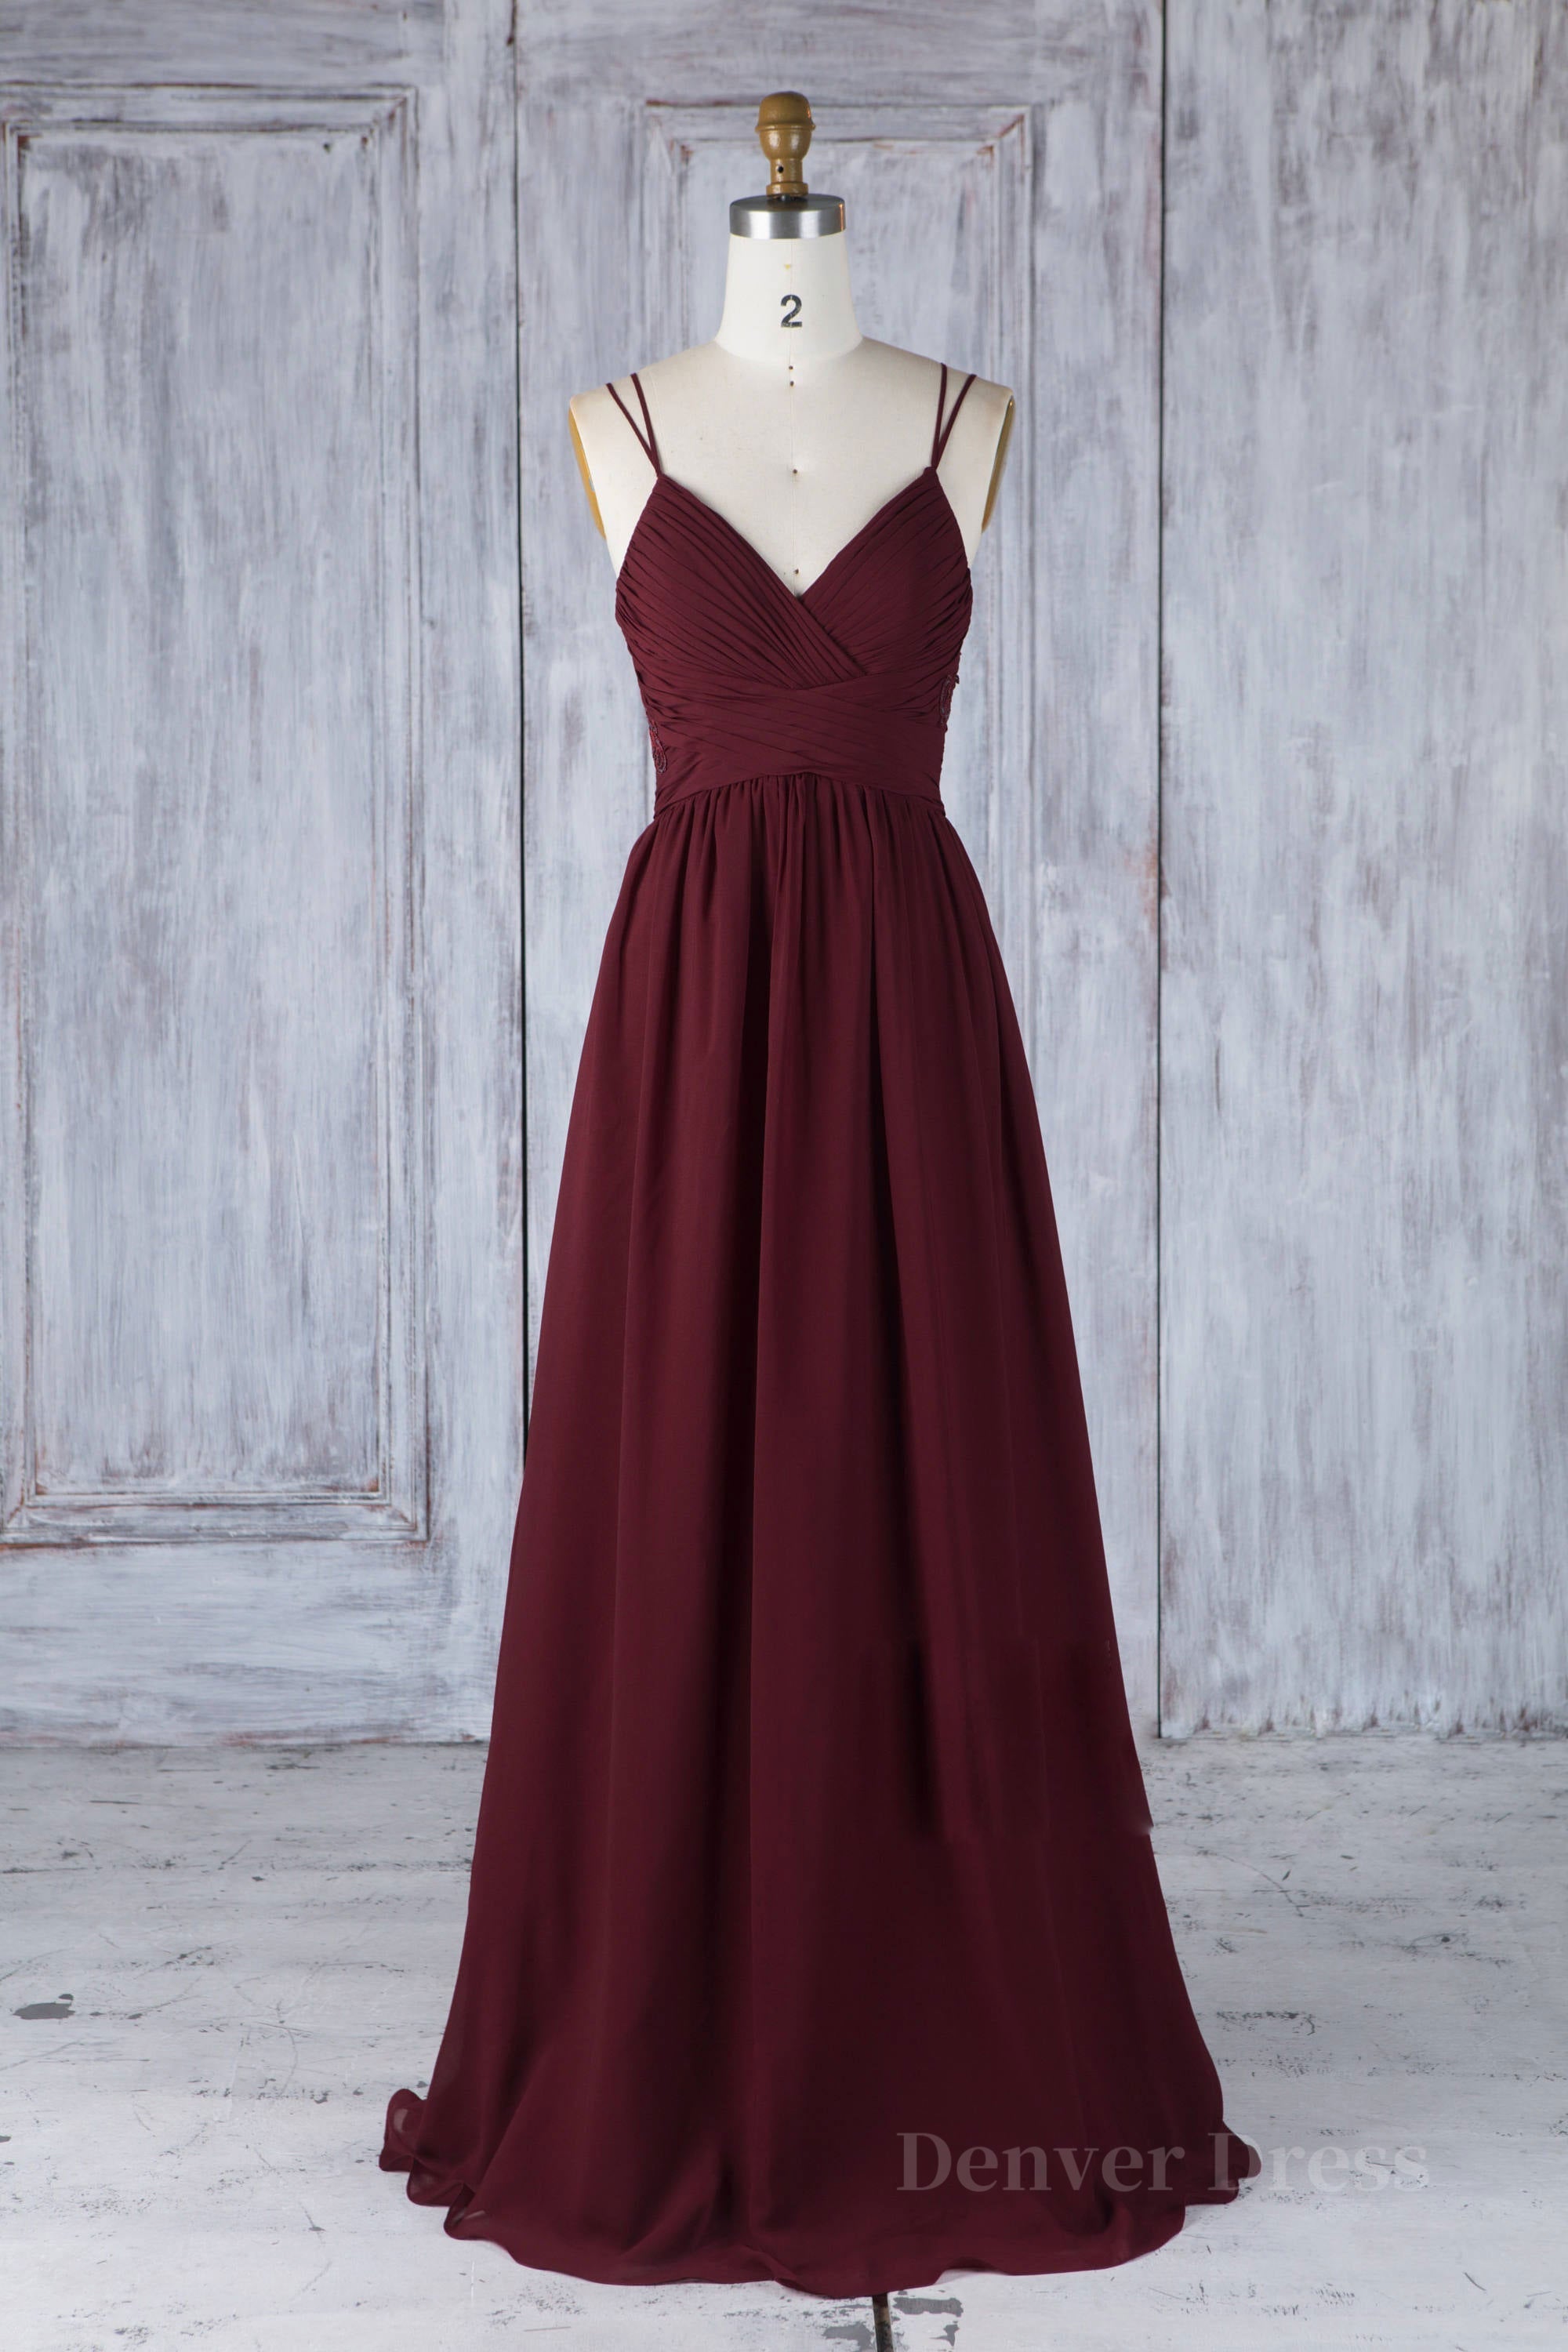 Burgundy tulle lace long prom dress burgundy lace evening dress